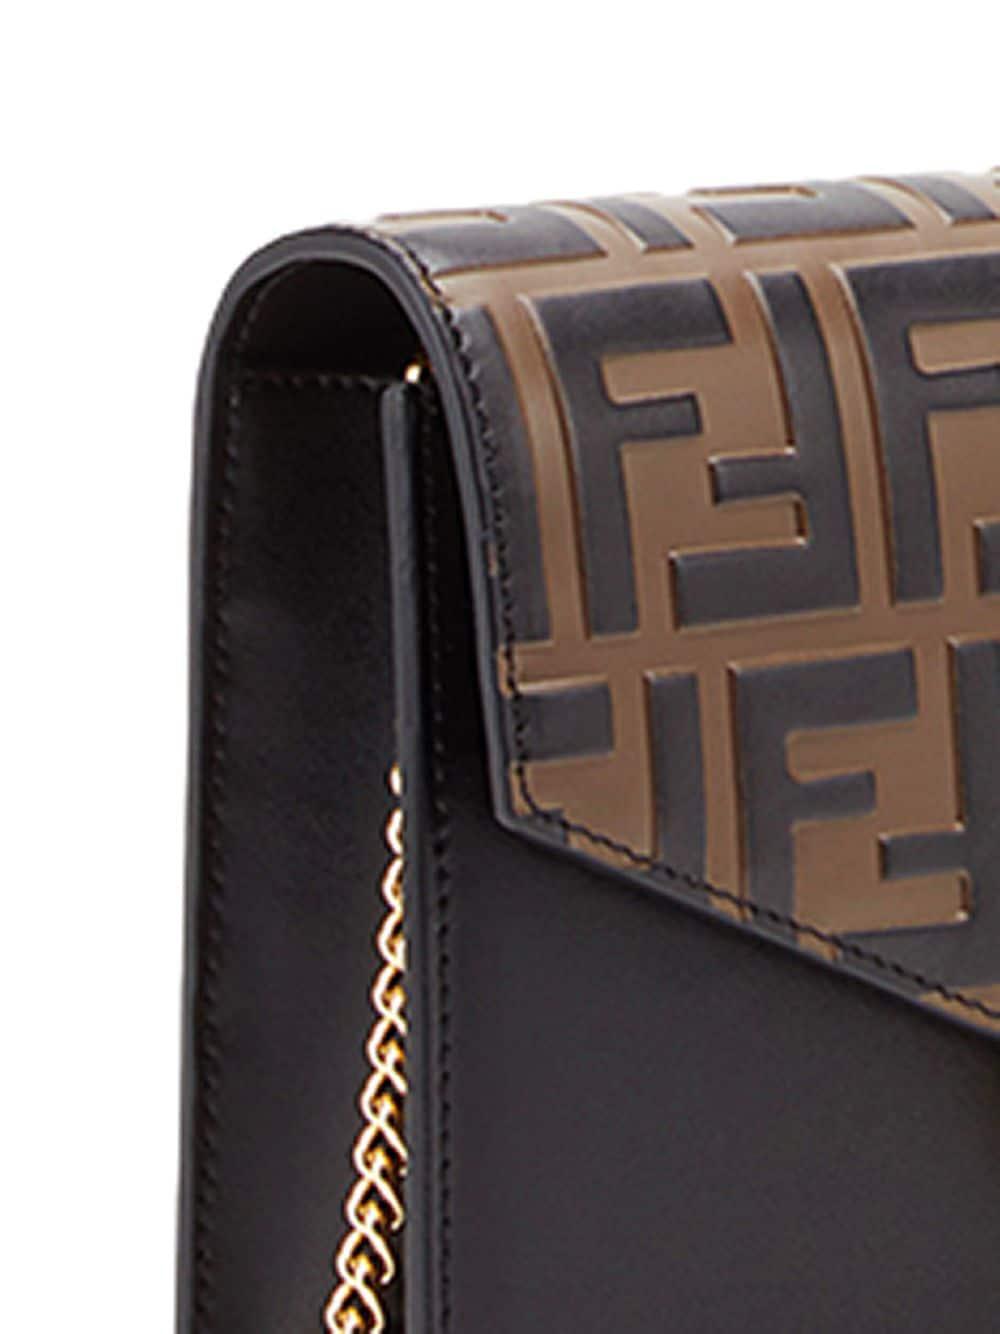 Fendi Wallet With Chain - www.inf-inet.com